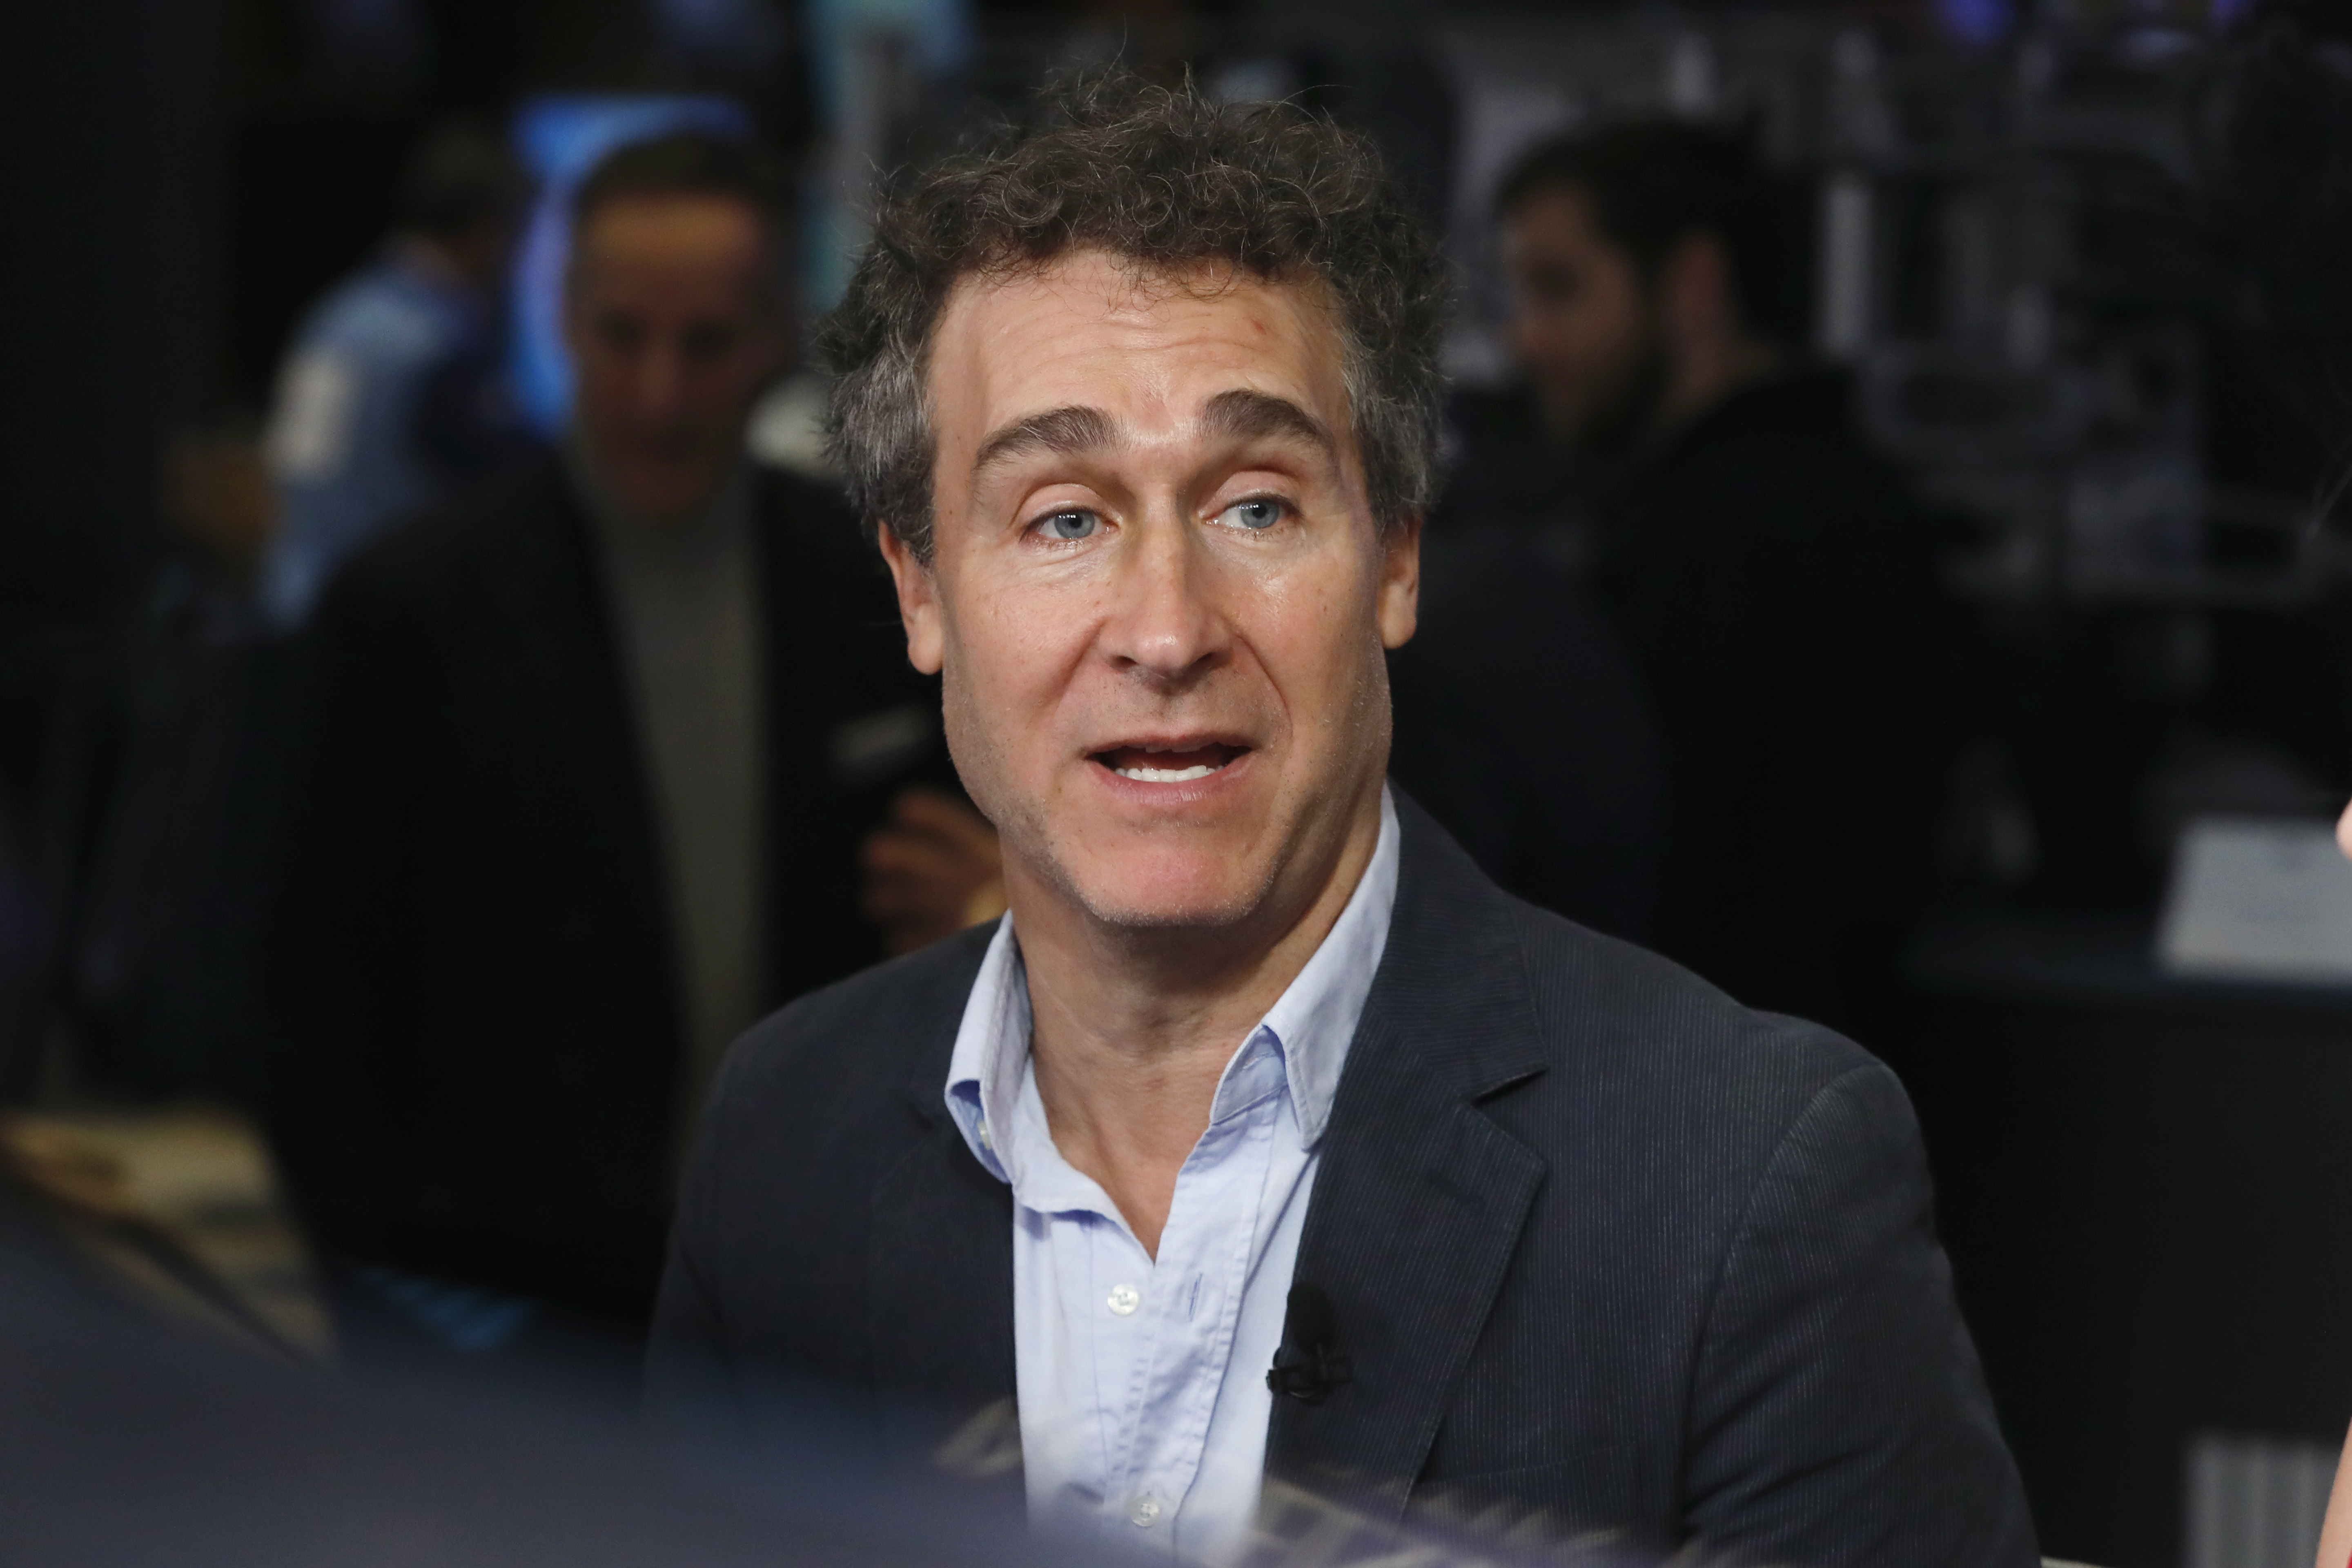 FILE - Film director Doug Liman appears on the floor of the New York Stock Exchange, on Oct. 22, 2018. In four months, in the middle of a pandemic and widespread shutdowns, Liman and his team wrote, shot and edited a glossy Harrods heist film in London with Anne Hathaway and Chiwetel Ejiofor. The result, “Locked Down,” comes to HBO Max Thursday. (AP Photo/Richard Drew, File)